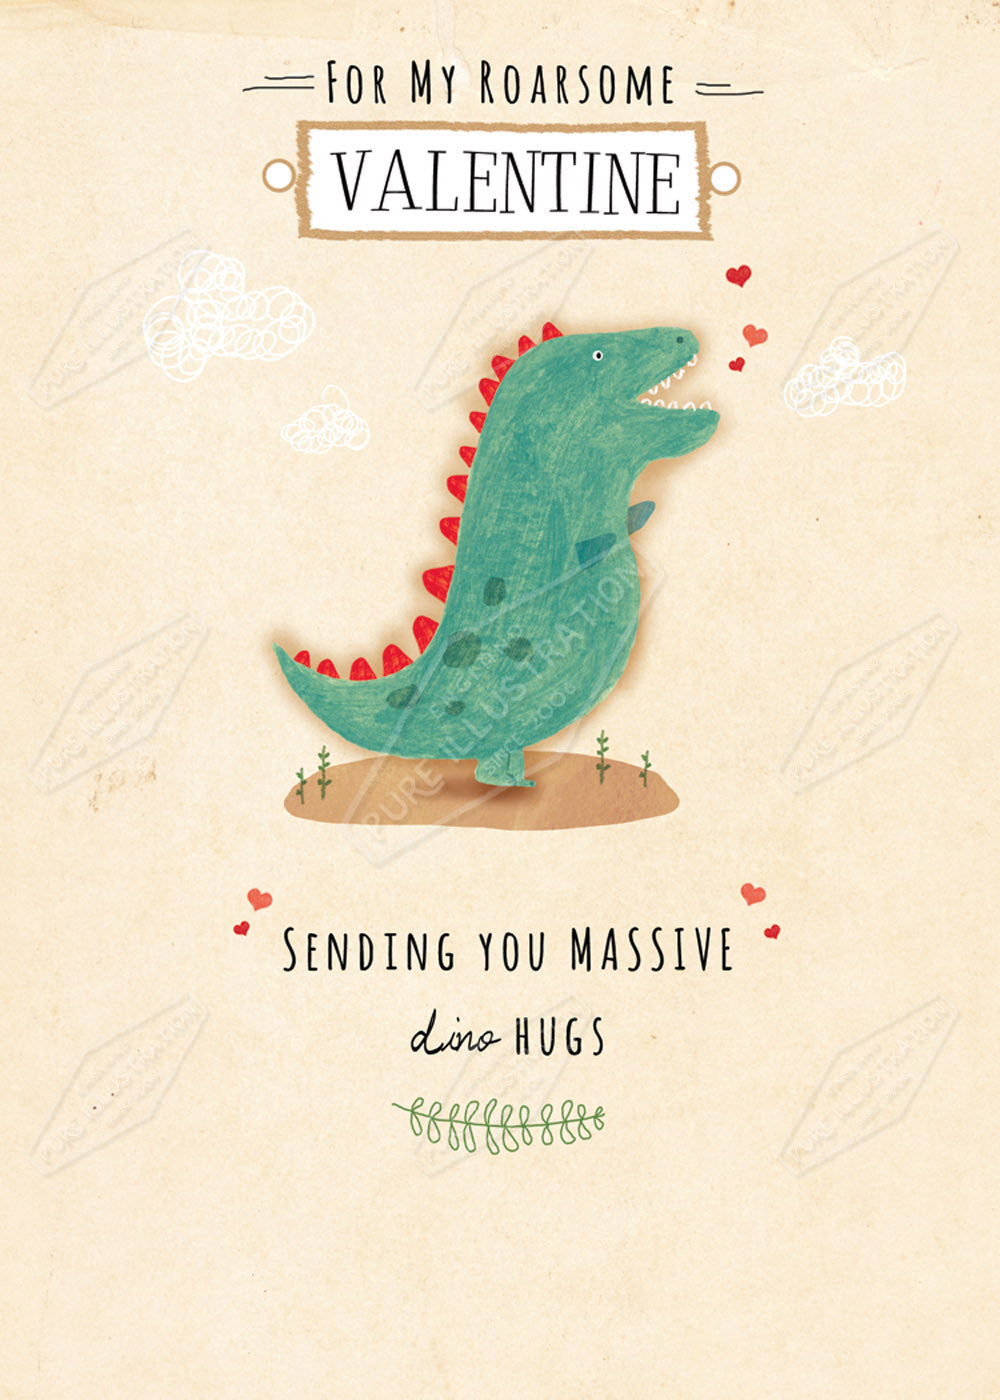 Cute Valentines Greeting Card Design with Dinosaur Joke by Cory Reid for Pure Art Licensing Agency International